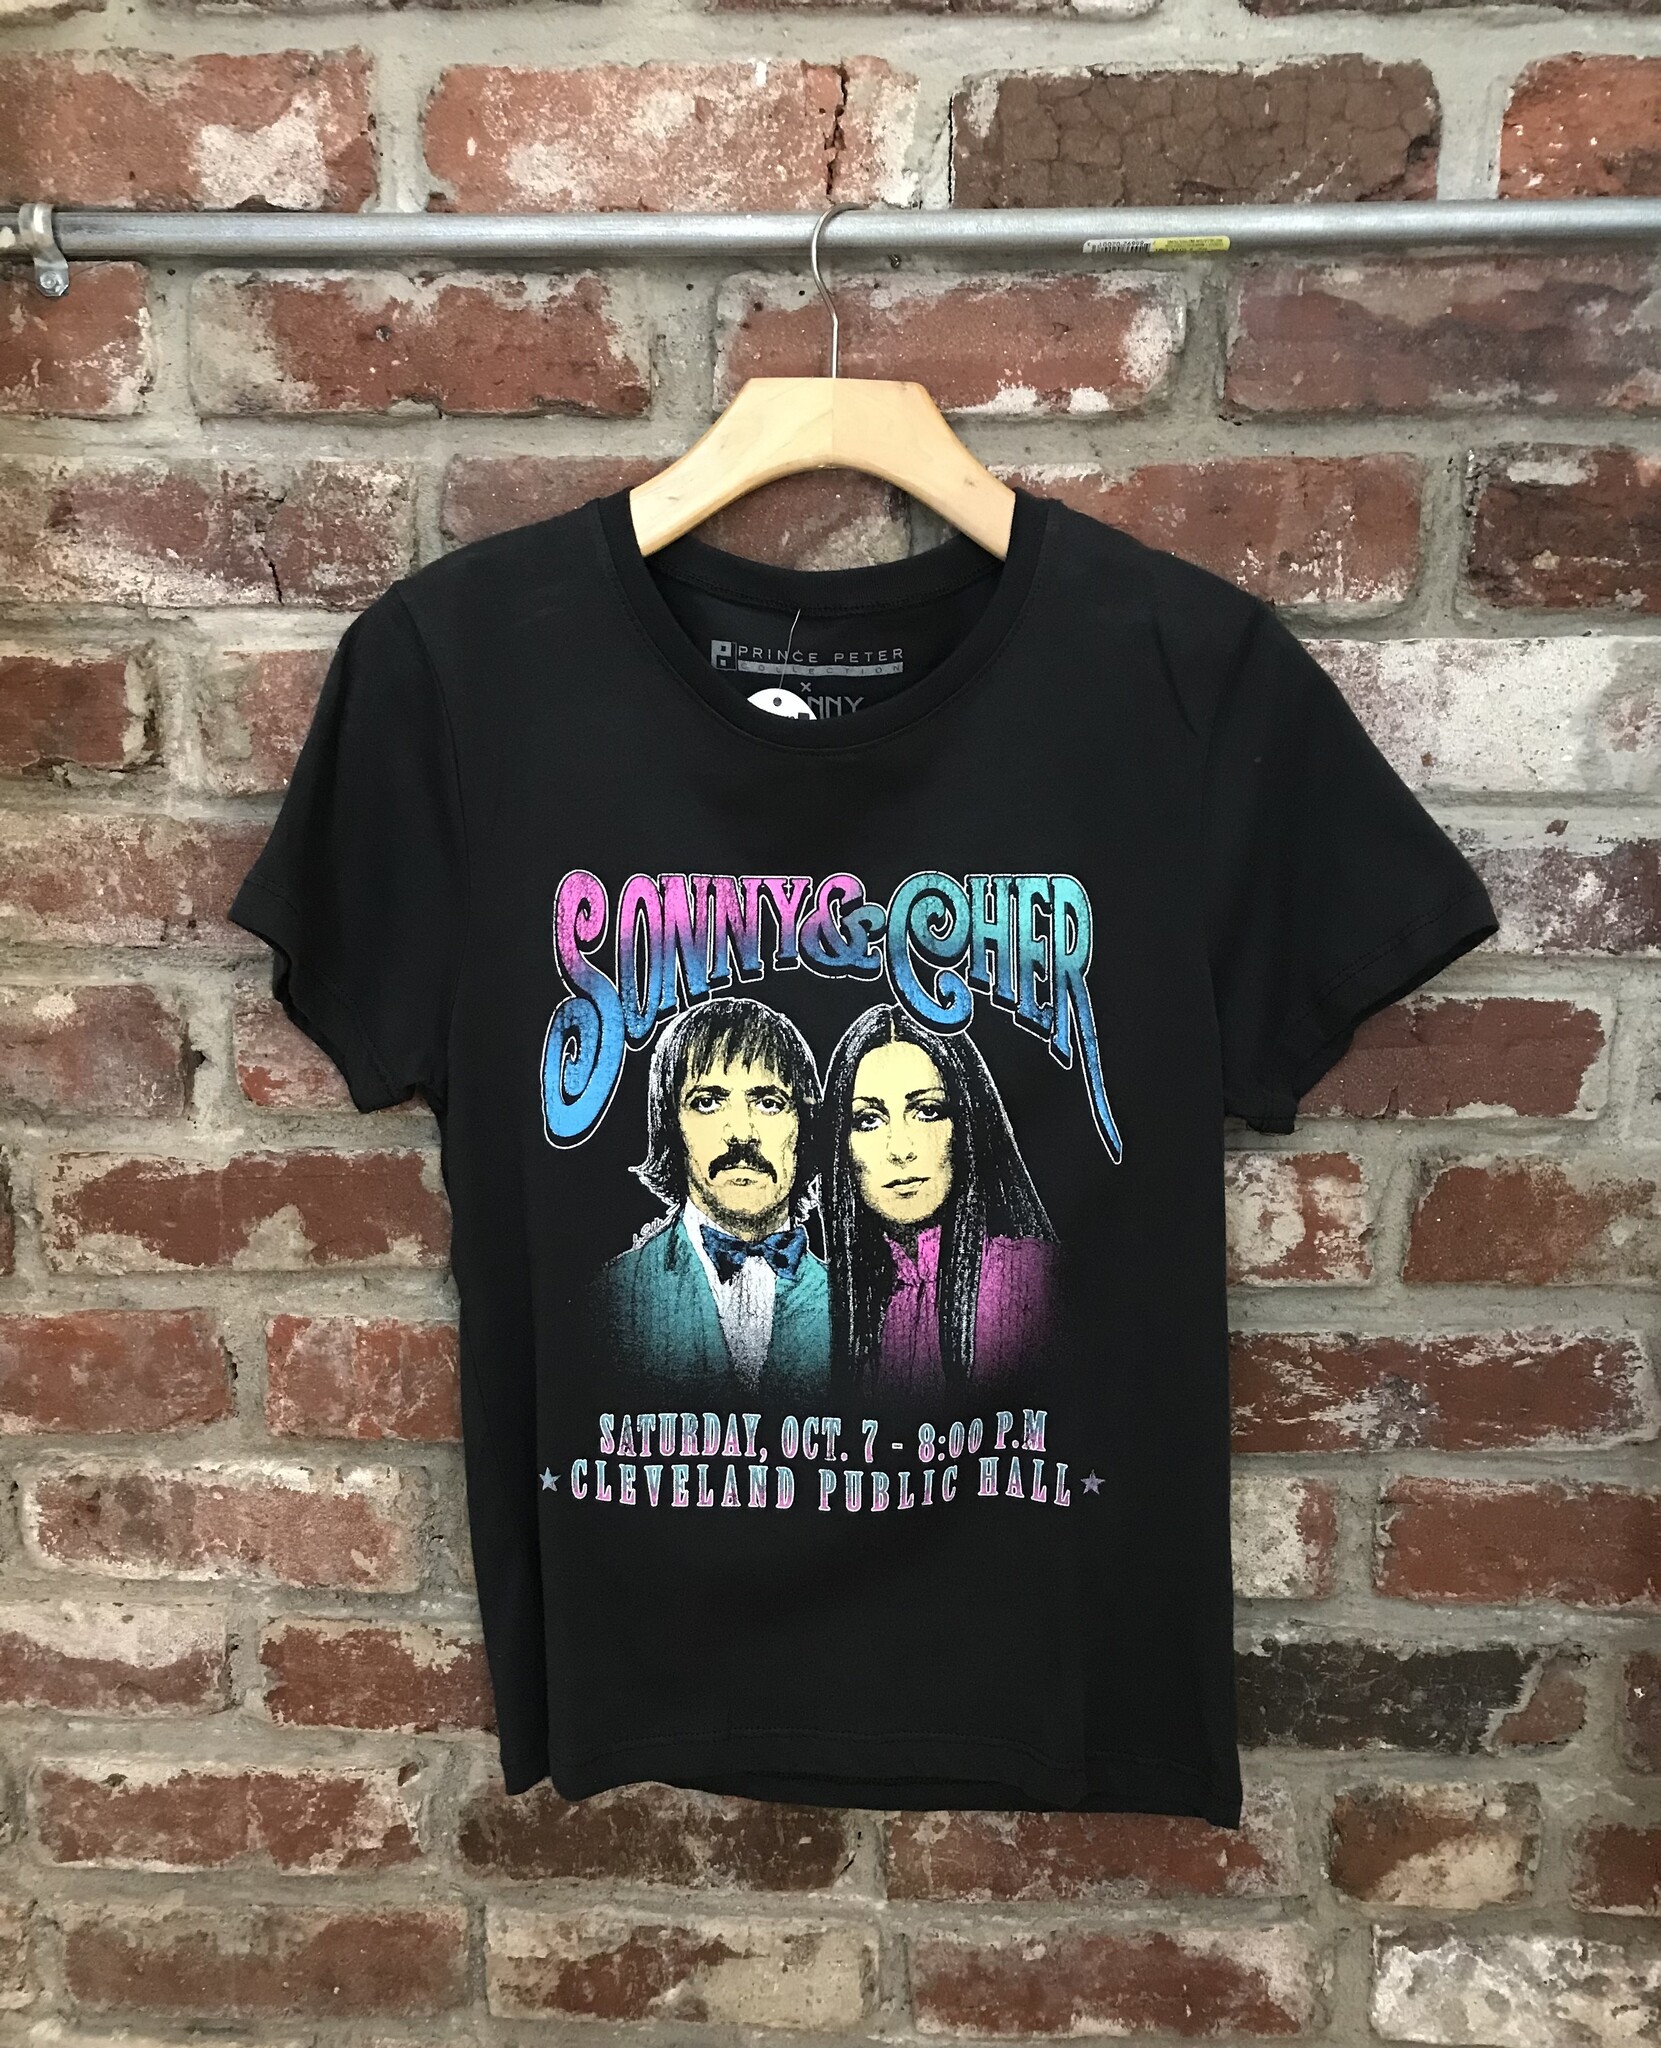 Prince Peter Sonny & Cher "Cleveland Public Hall" Tee